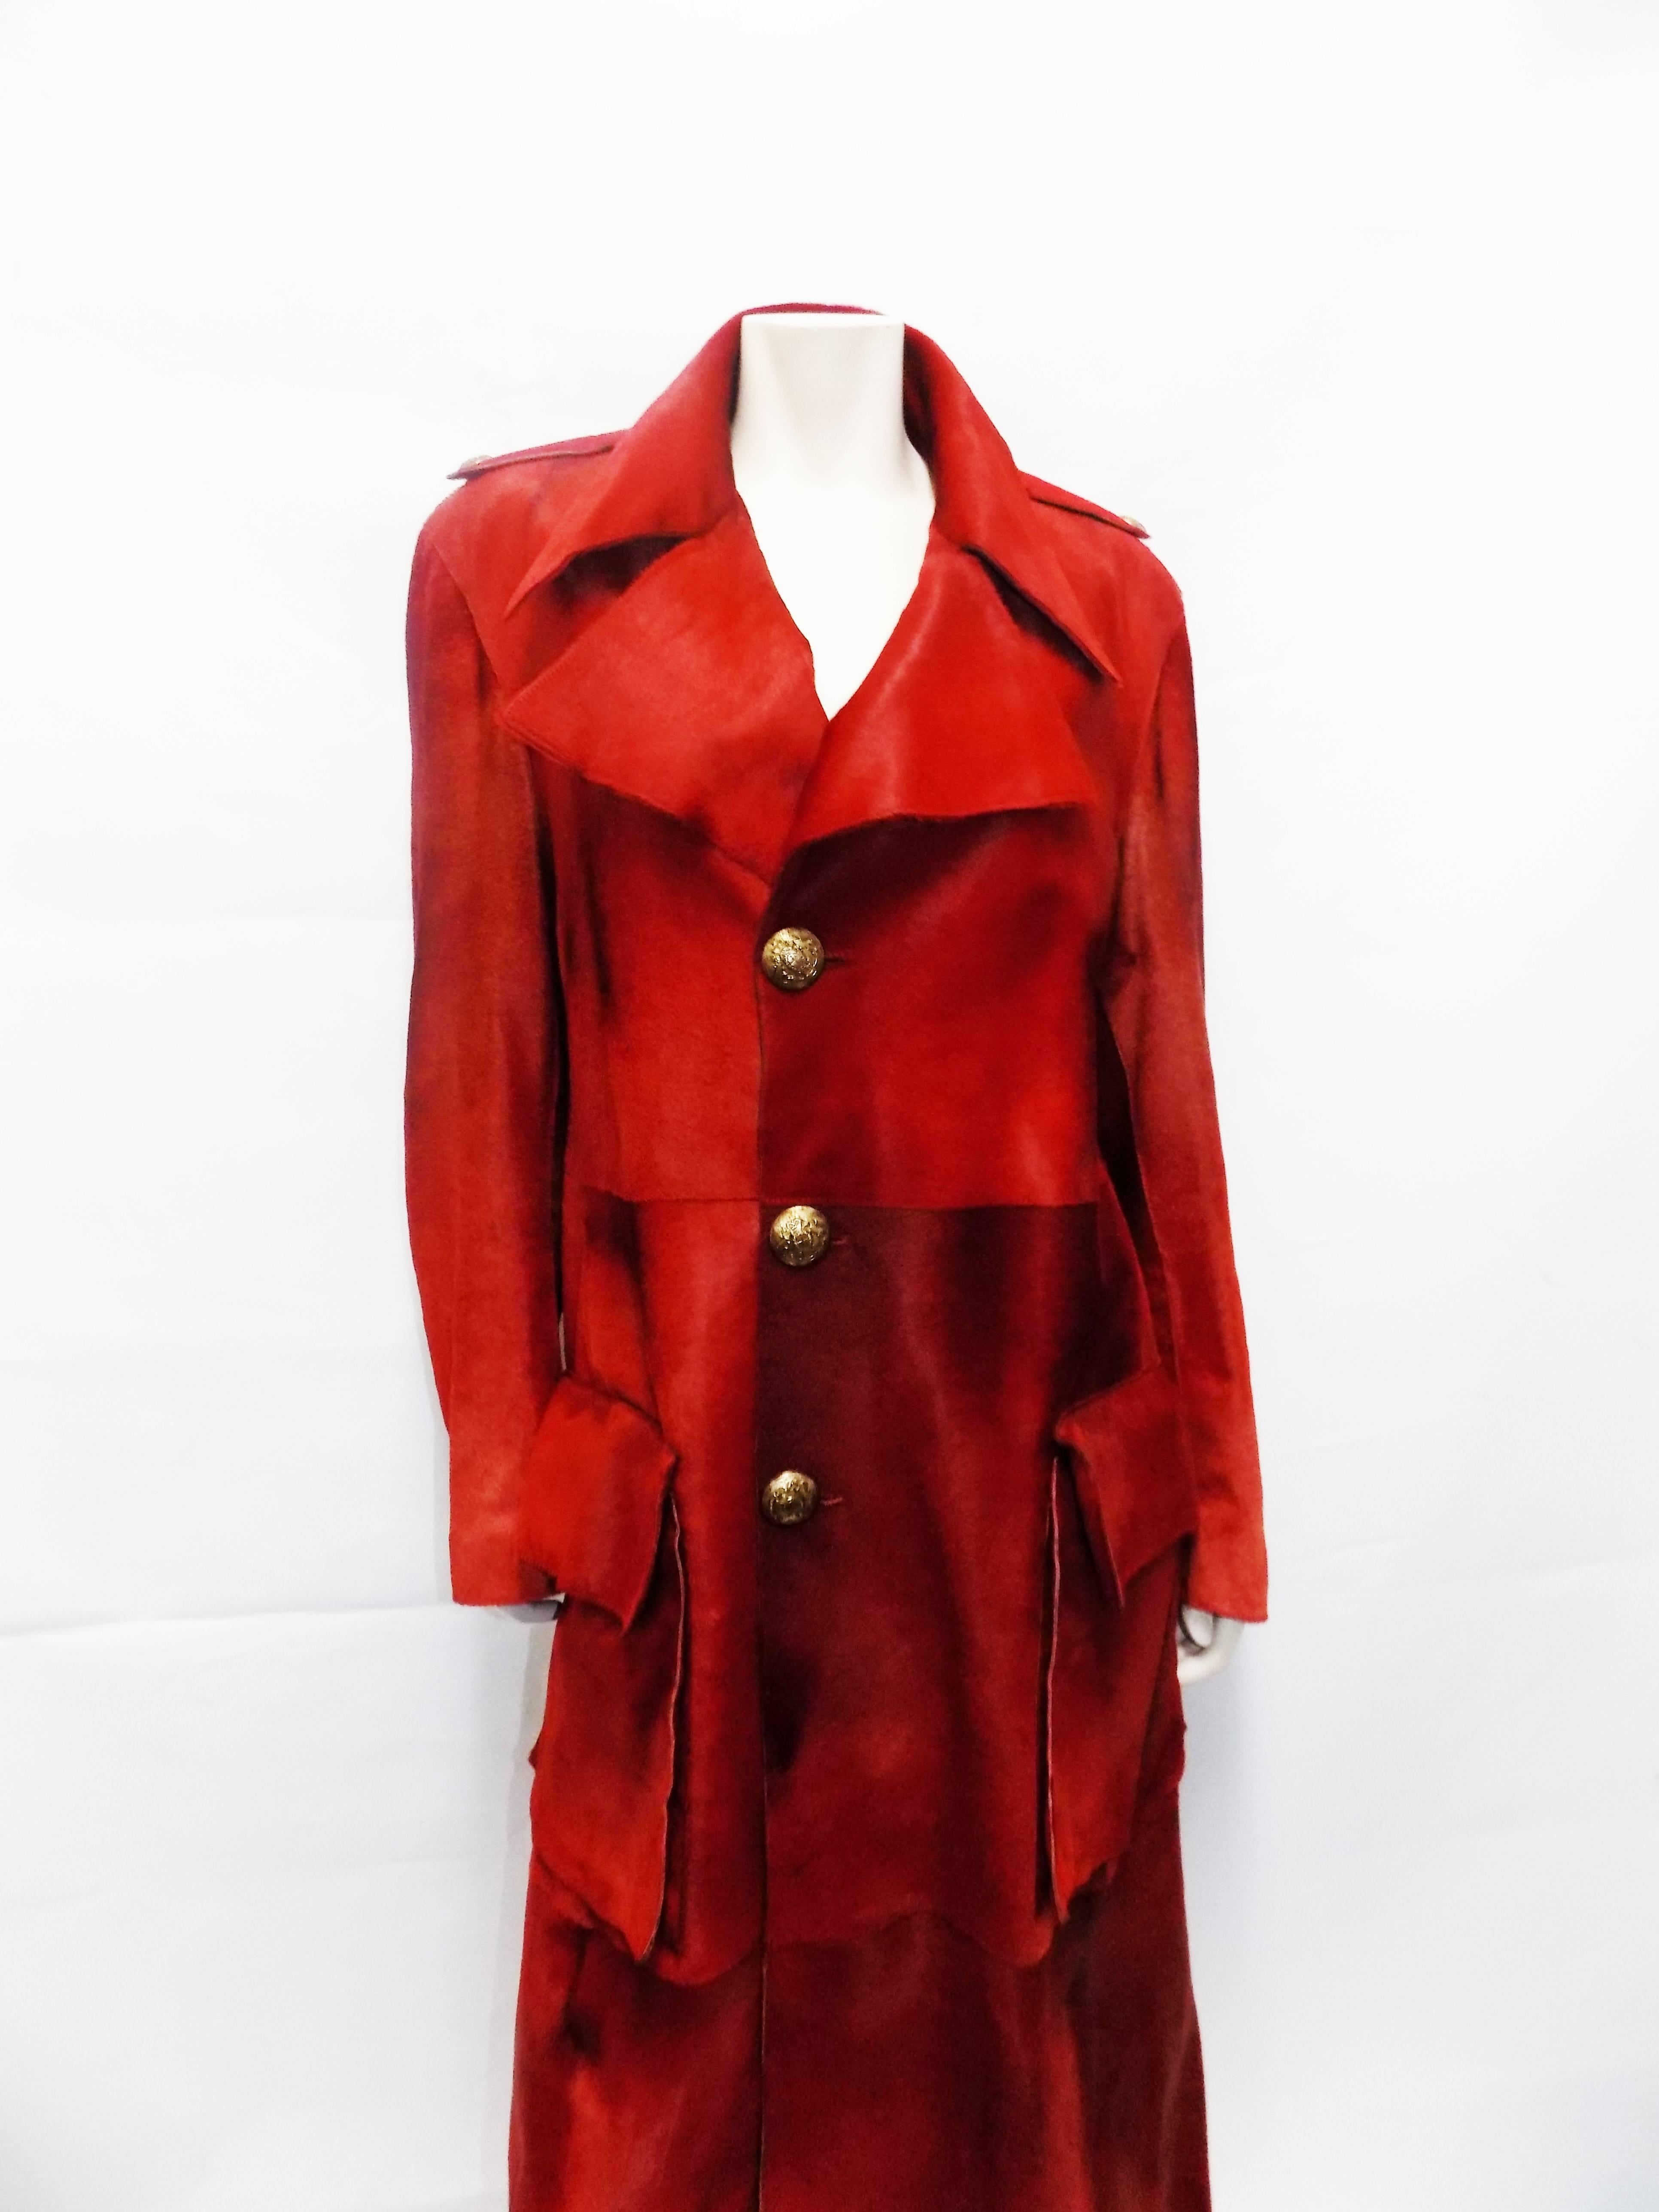 Roberto Cavalli Unisex  Blood Red Pony Hair Coat  One of A Kind  SZ Large 1